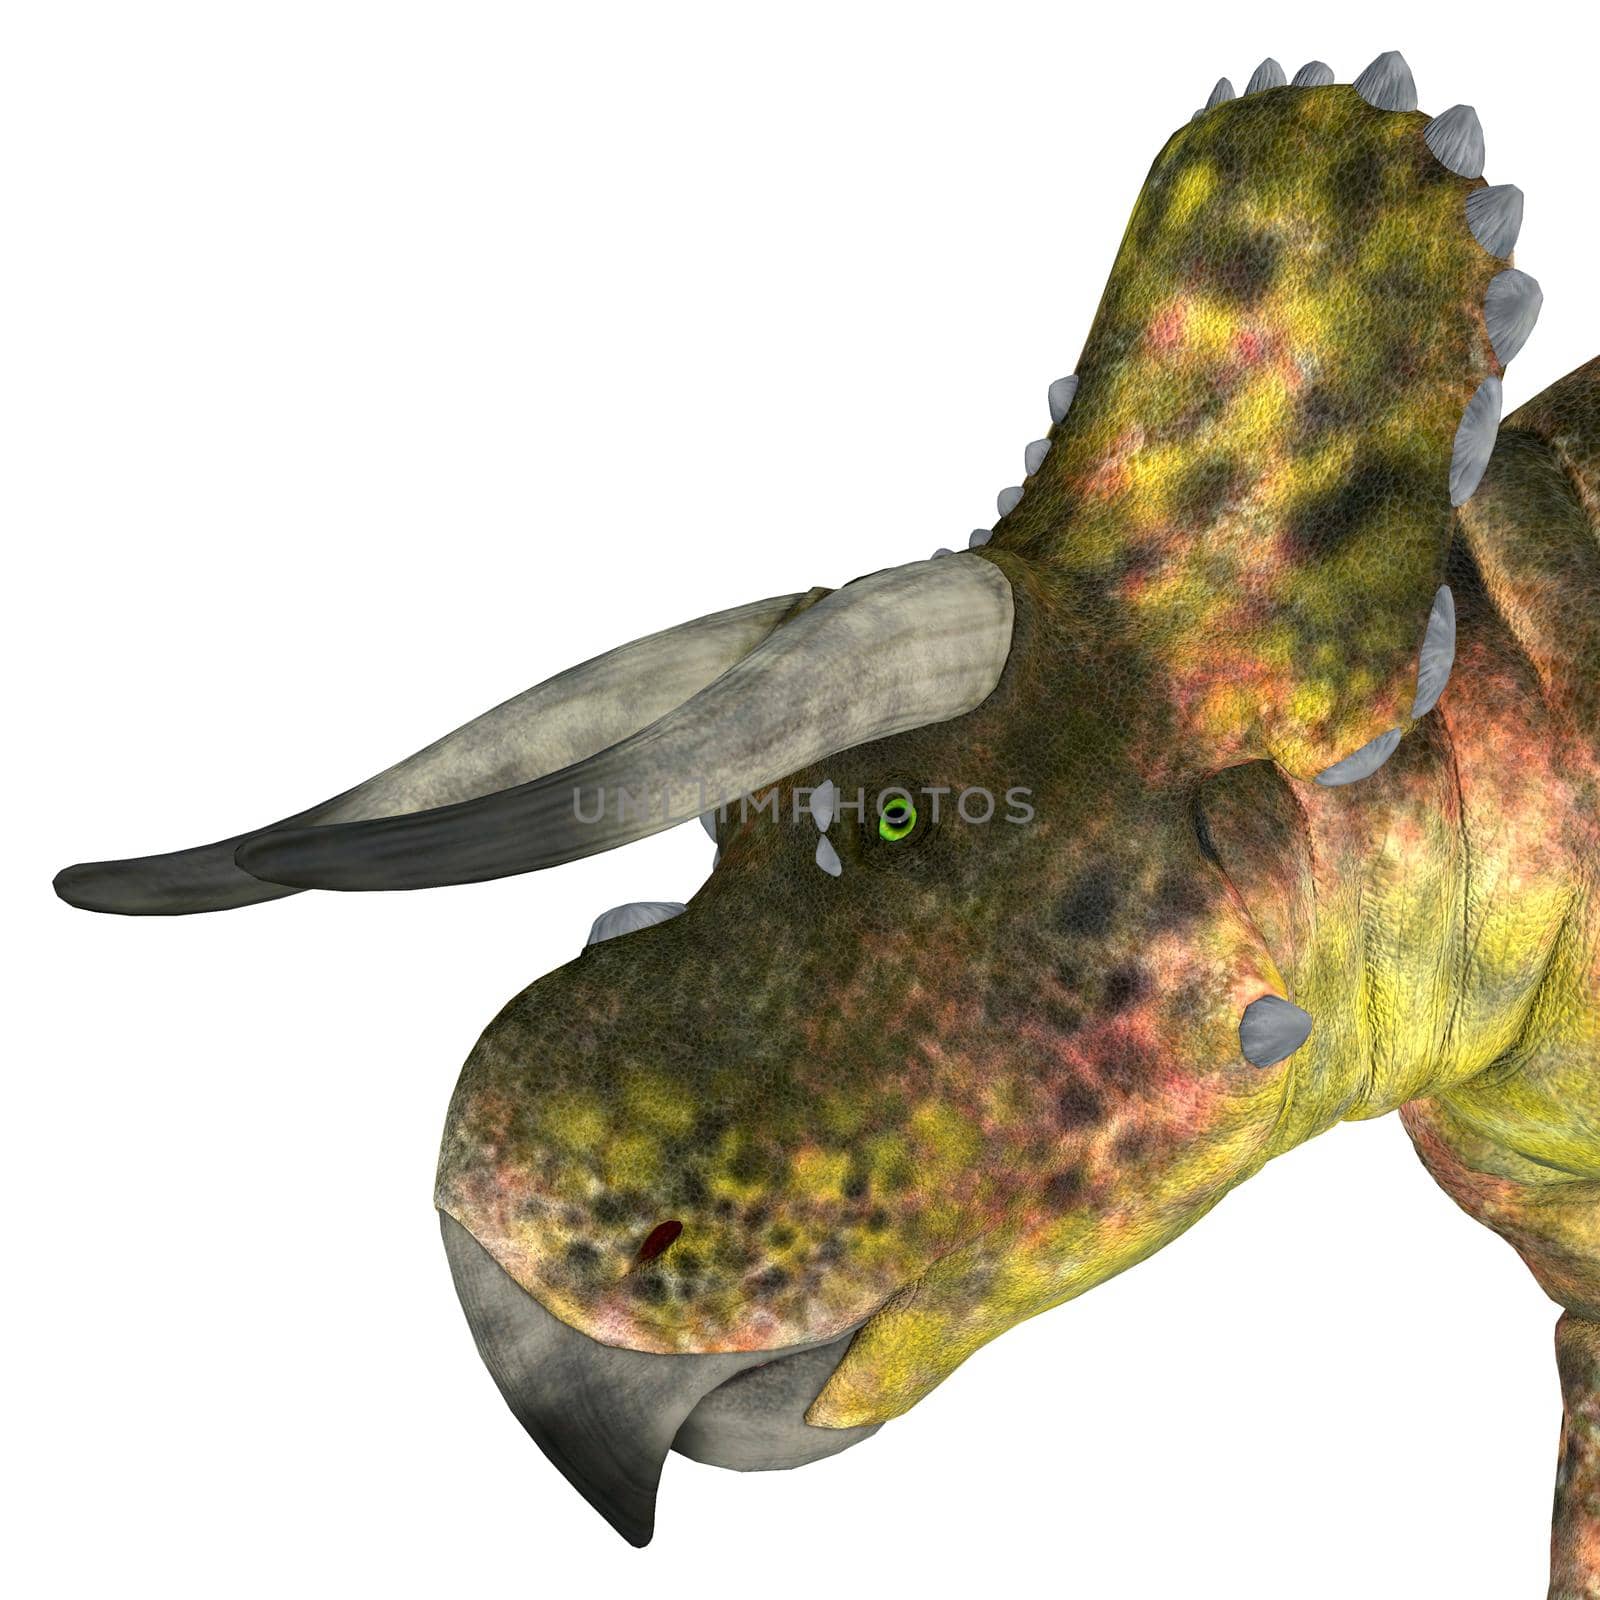 Nasutoceratops was a herbivorous Ceratopsid dinosaur that lived in Utah, USA during the Cretaceous Period.